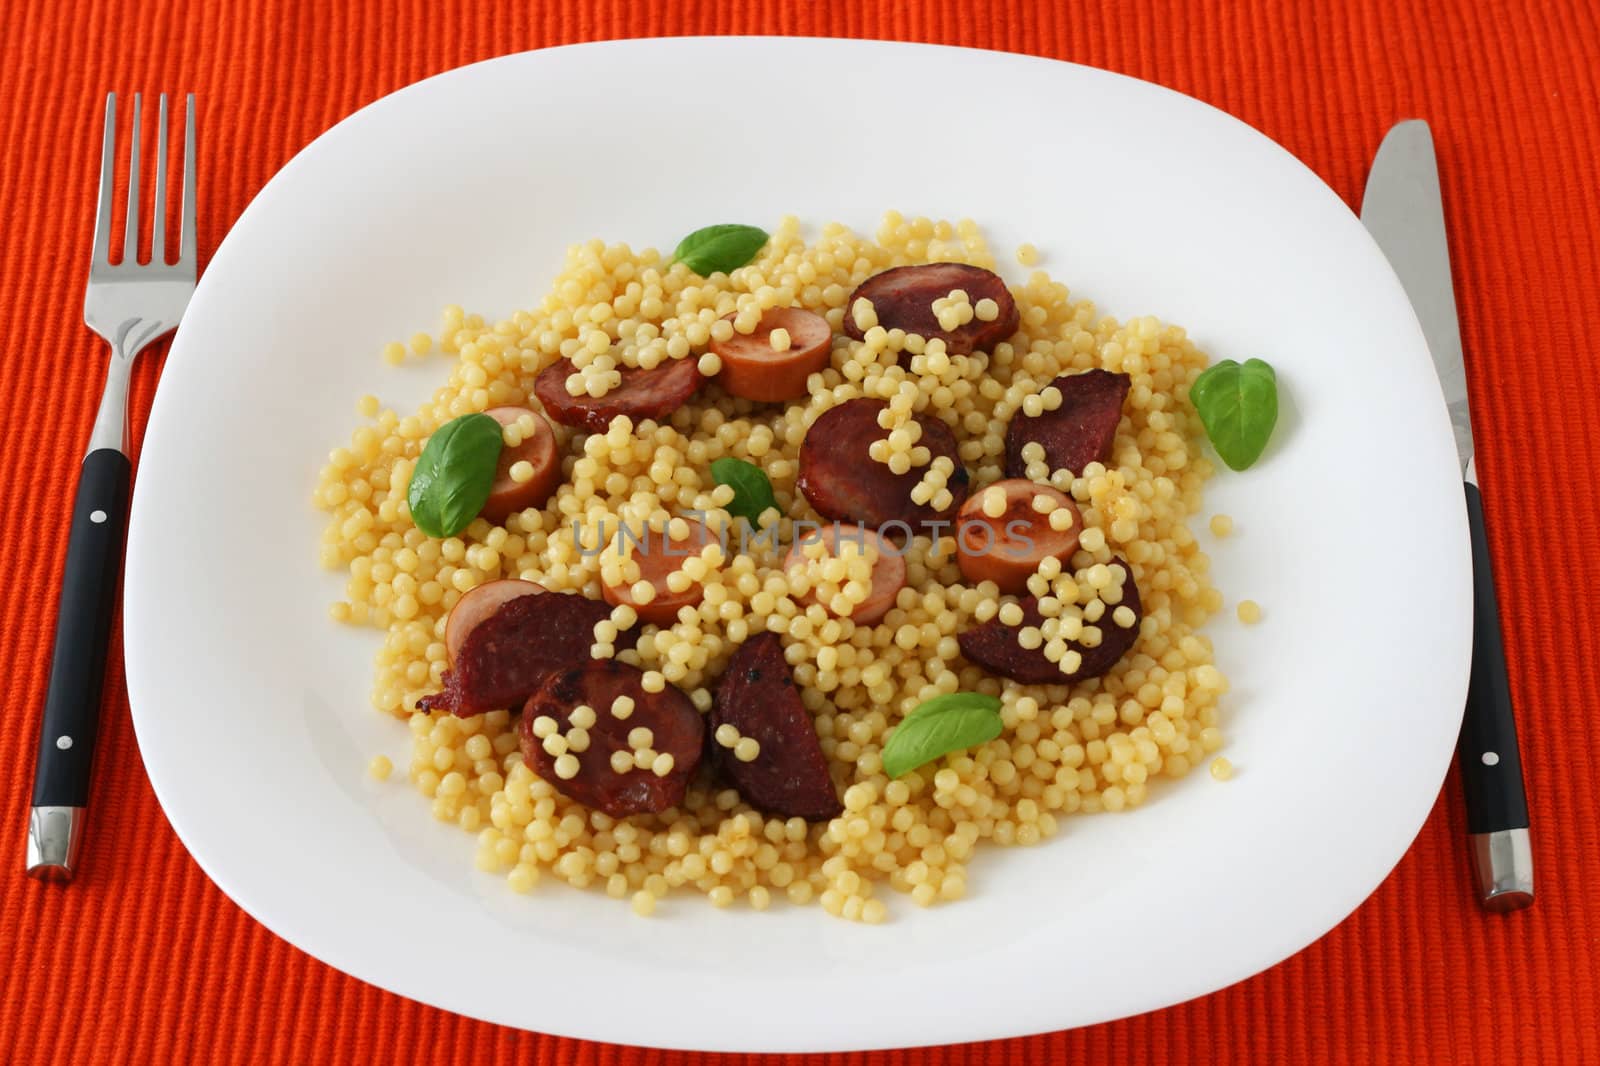 Couscous with fried sausages